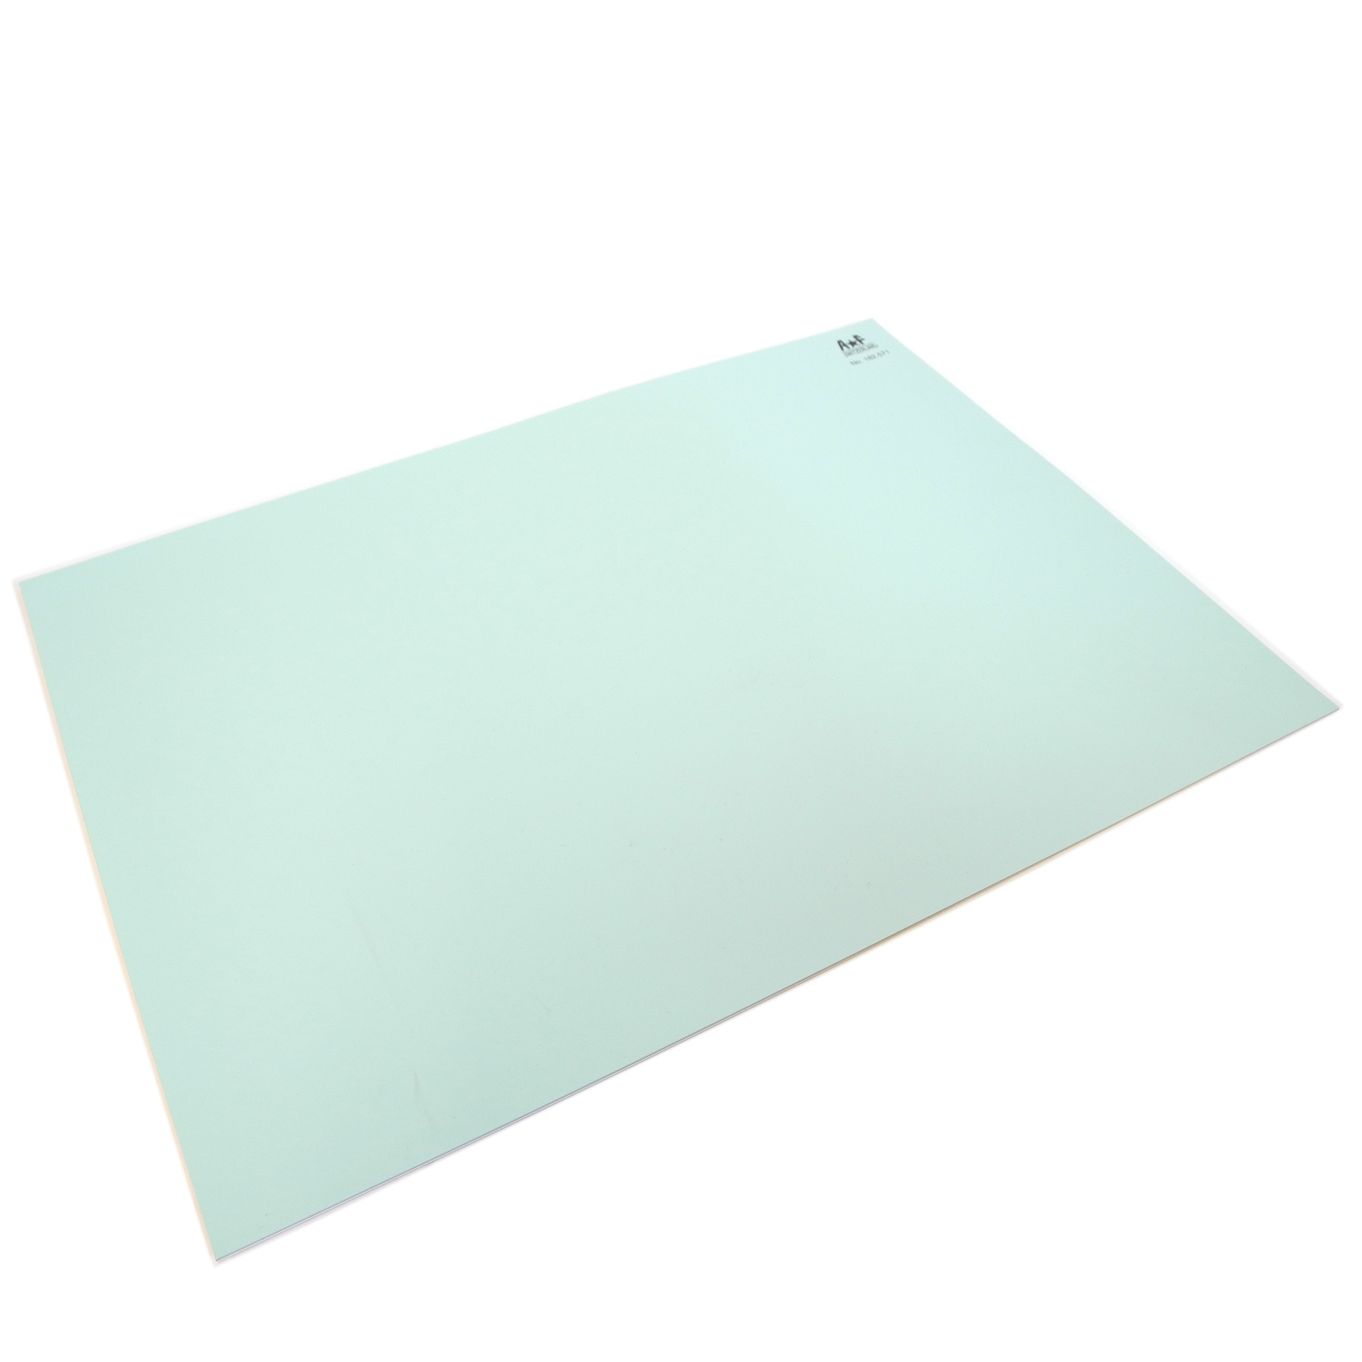 Bergeon GREEN 6808 Work Pad Bench Mat Plastic with Adhesive Backing 9.5 x  12.5 Inches